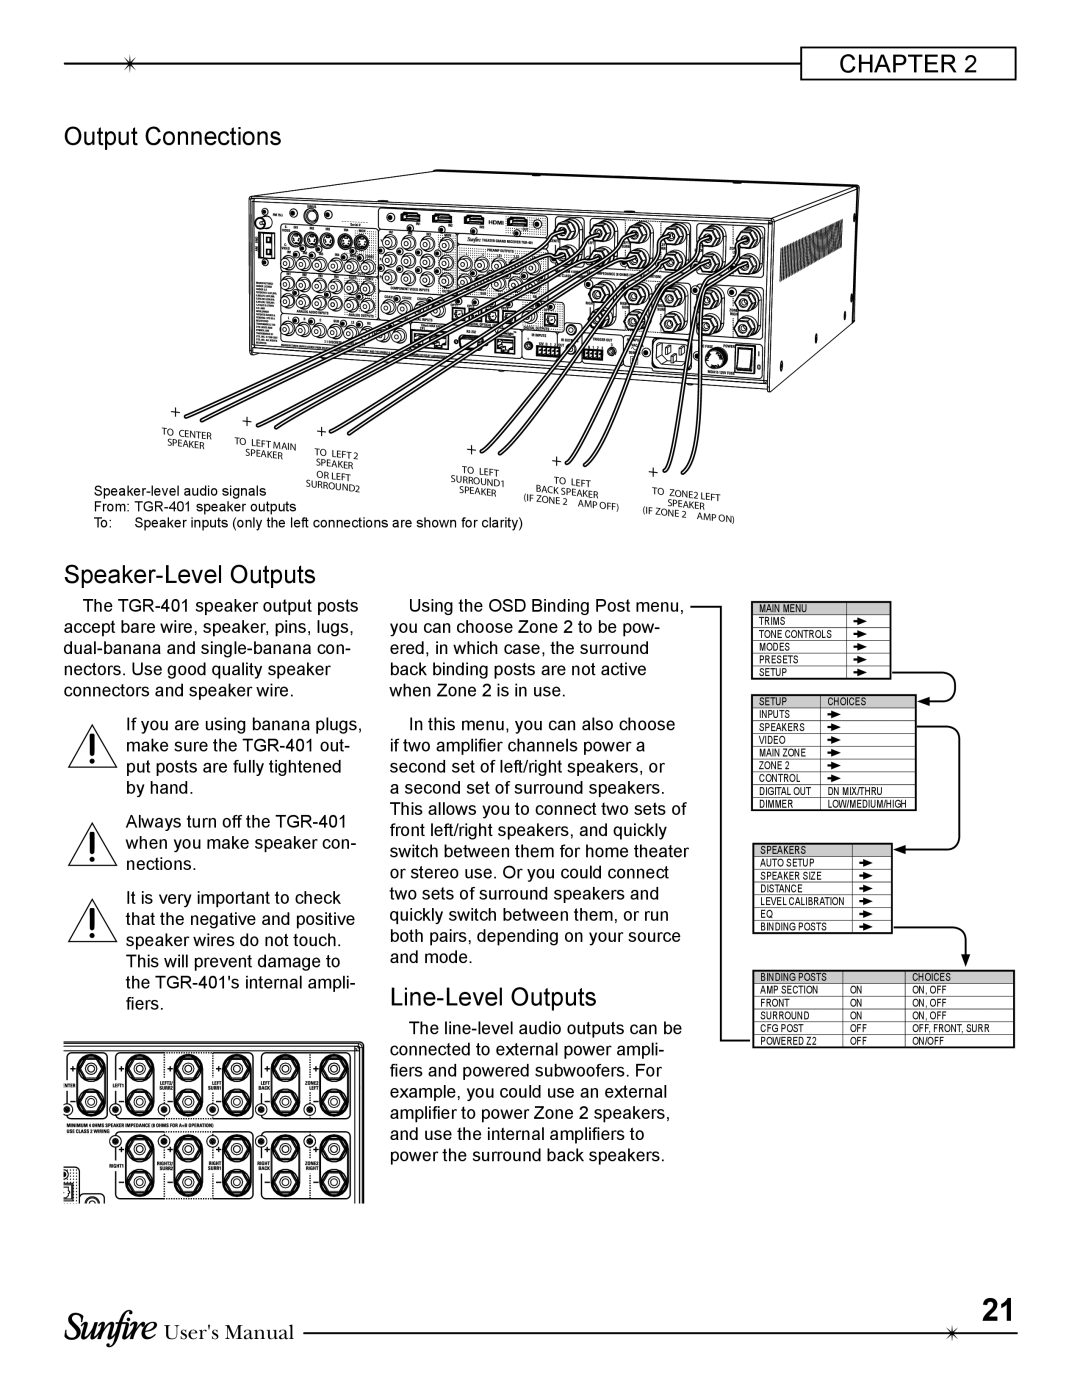 Sunfire TGR-401-230 manual CHAPTER Output Connections, Speaker-LevelOutputs, Line-LevelOutputs, Users Manual 